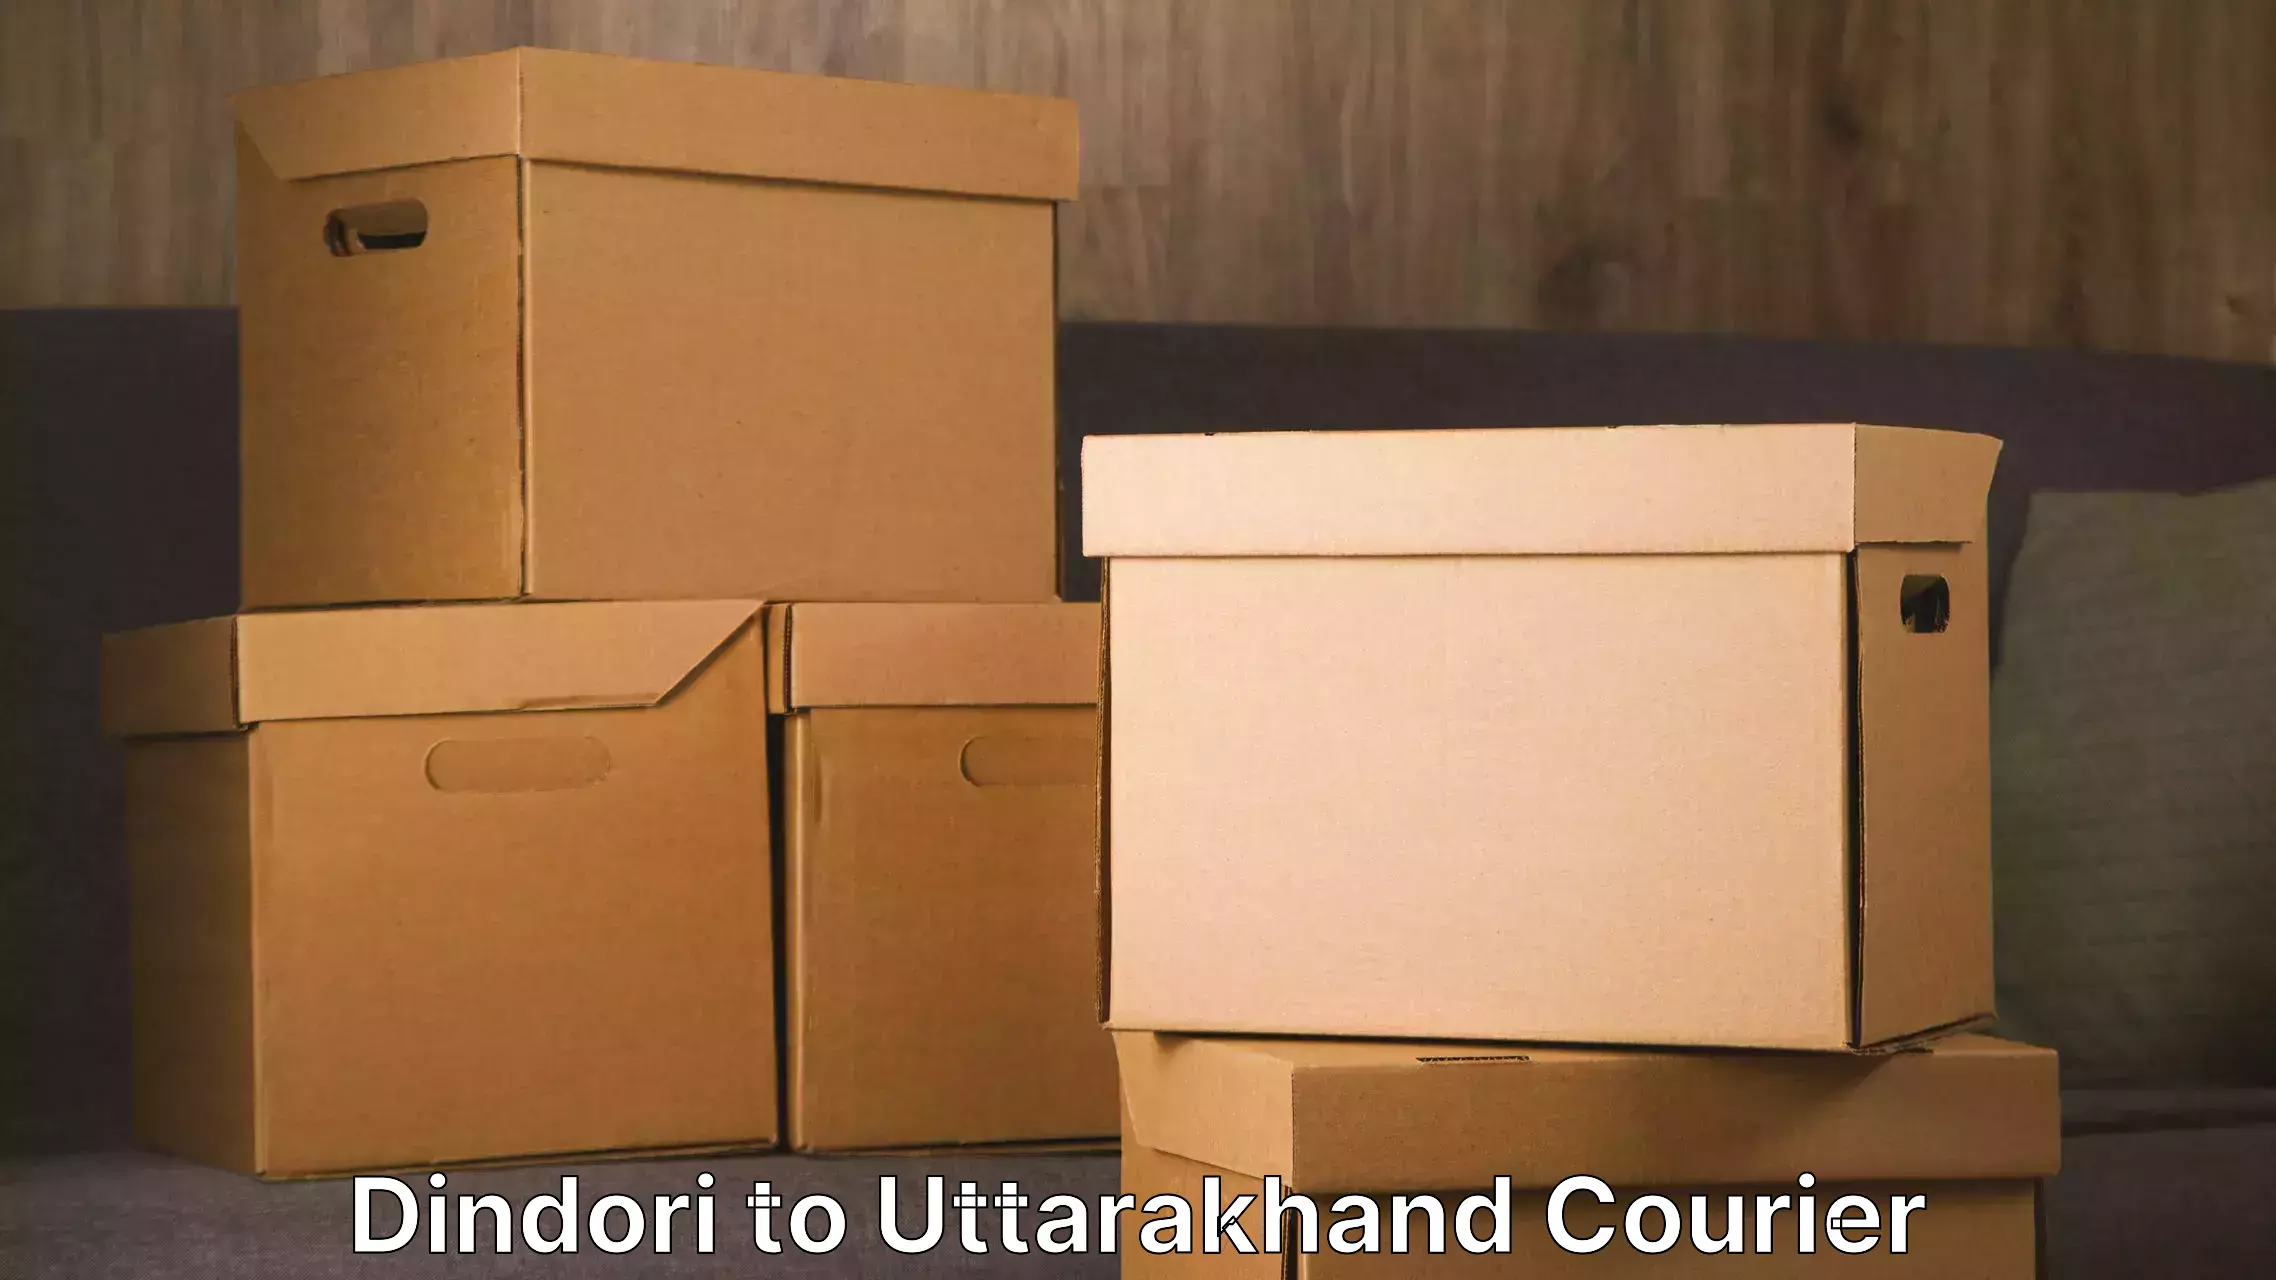 Trusted relocation experts Dindori to Nainital